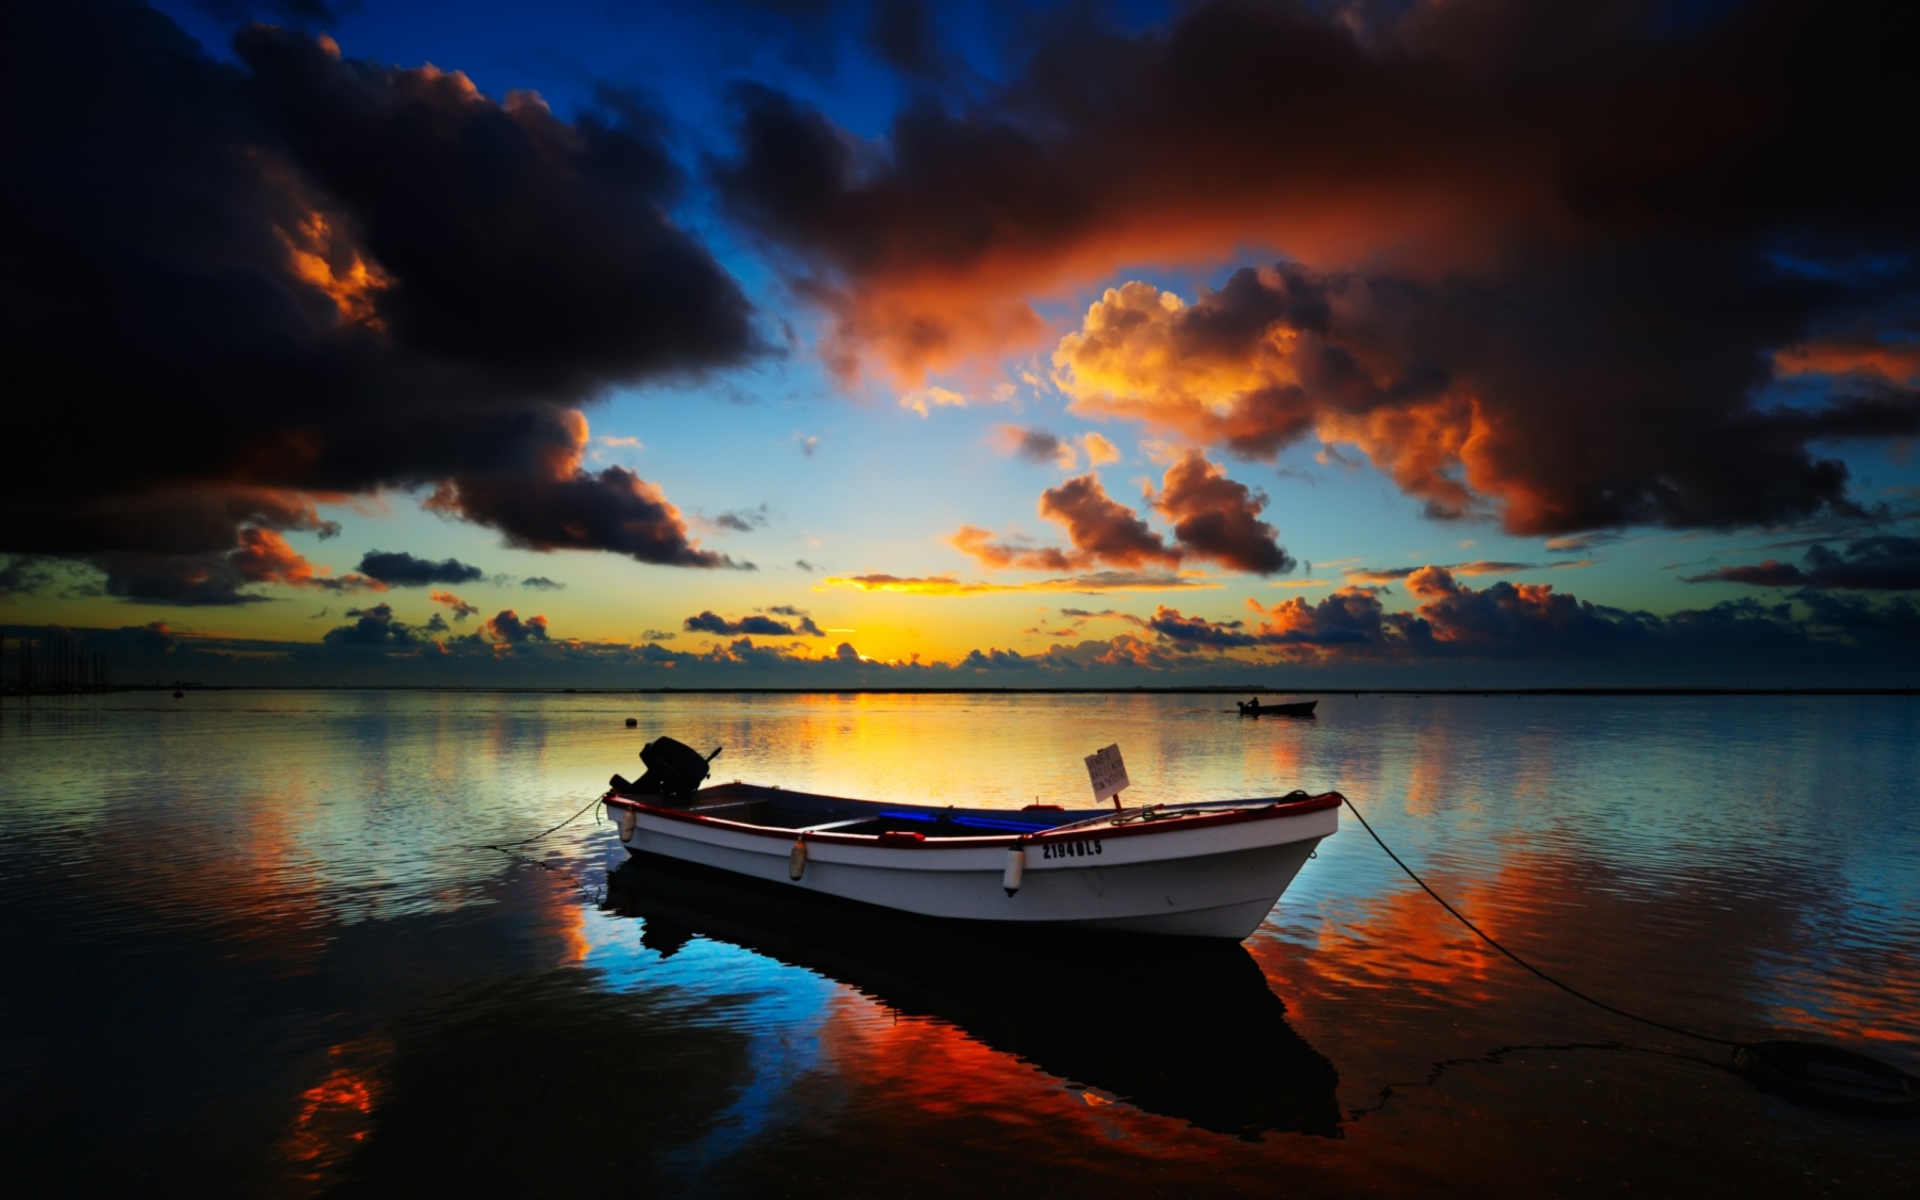 Das Boat In Sea At Sunset Wallpaper 1920x1200